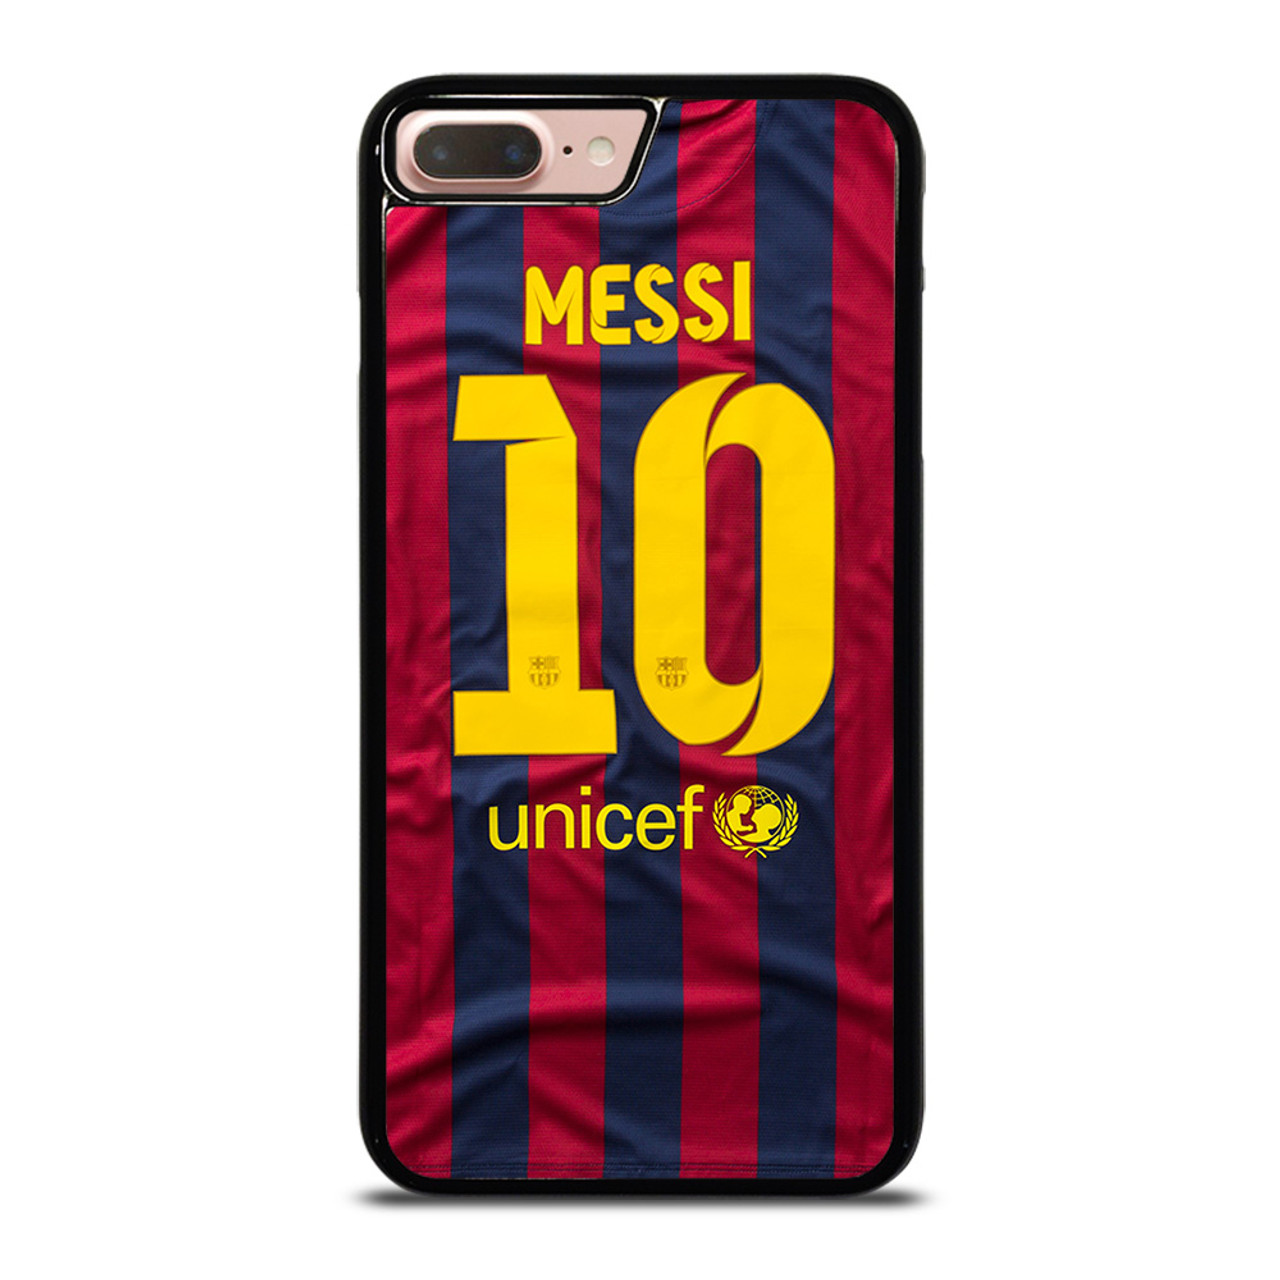 LIONEL MESSI 10 JERSEY BARCELONA iPhone 8 Plus Case Cover